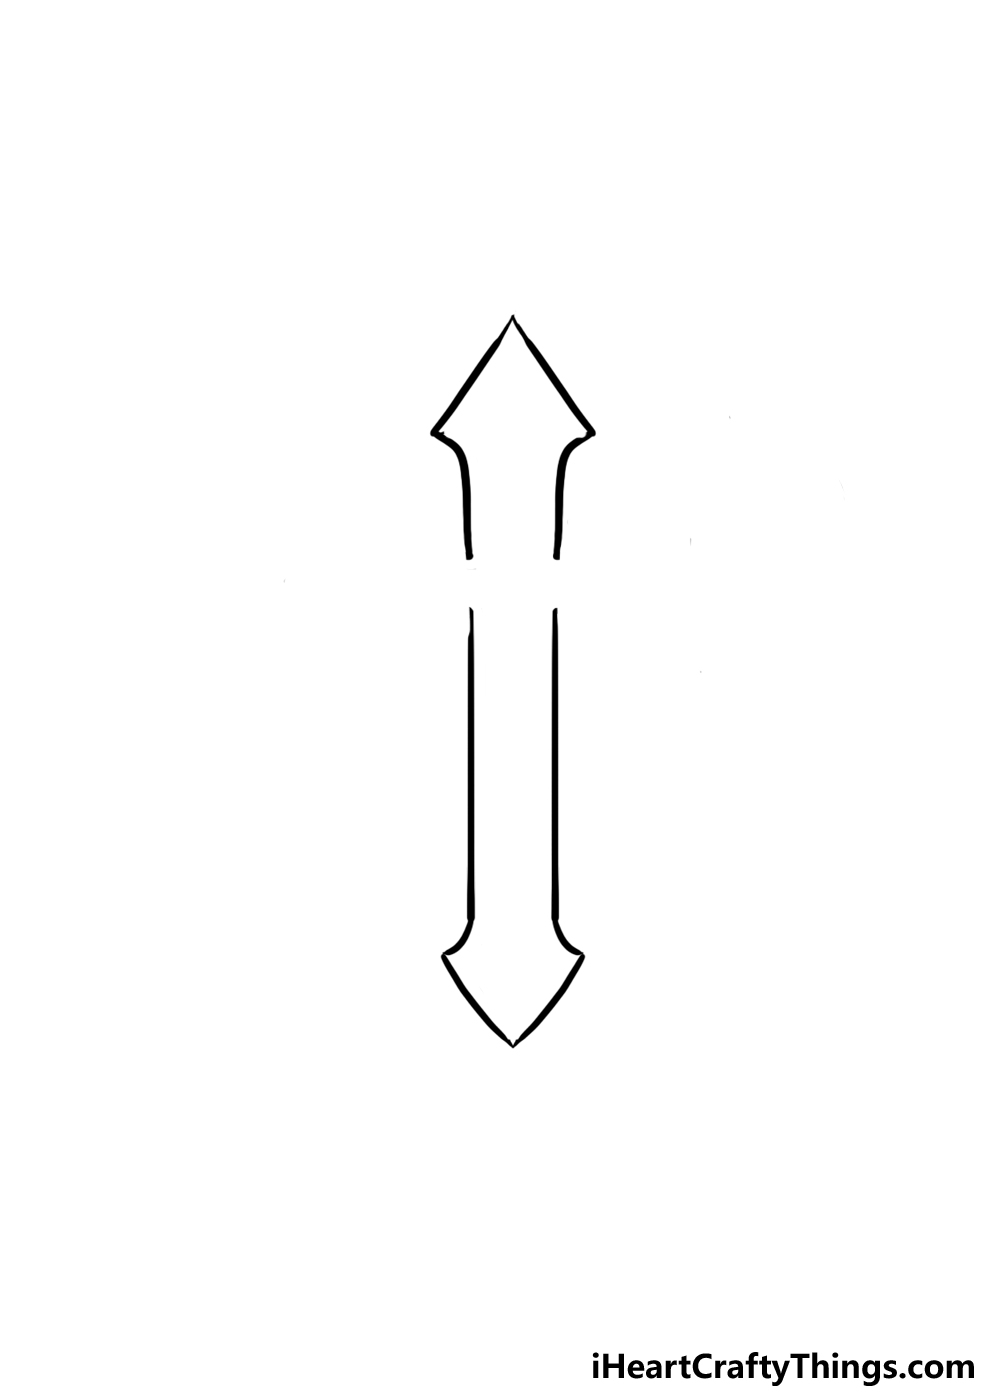 How to Draw A Cross With Wings step 1